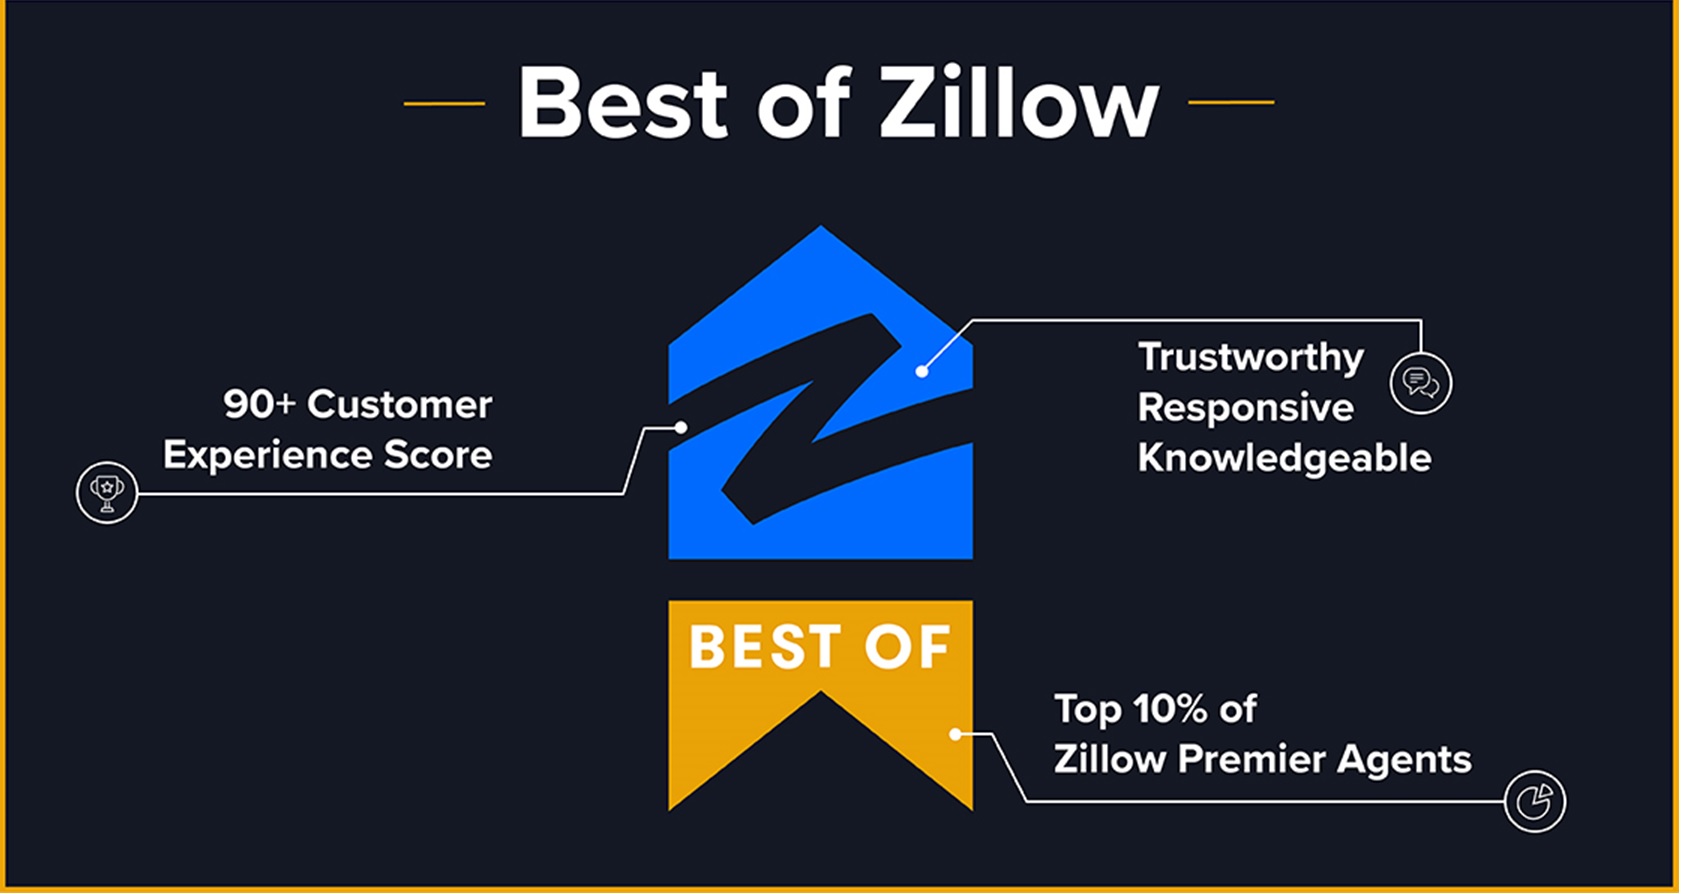 Best of Zillow Designation Awarded to Top Agent Jonathan Slater -- Scores in Top 1%